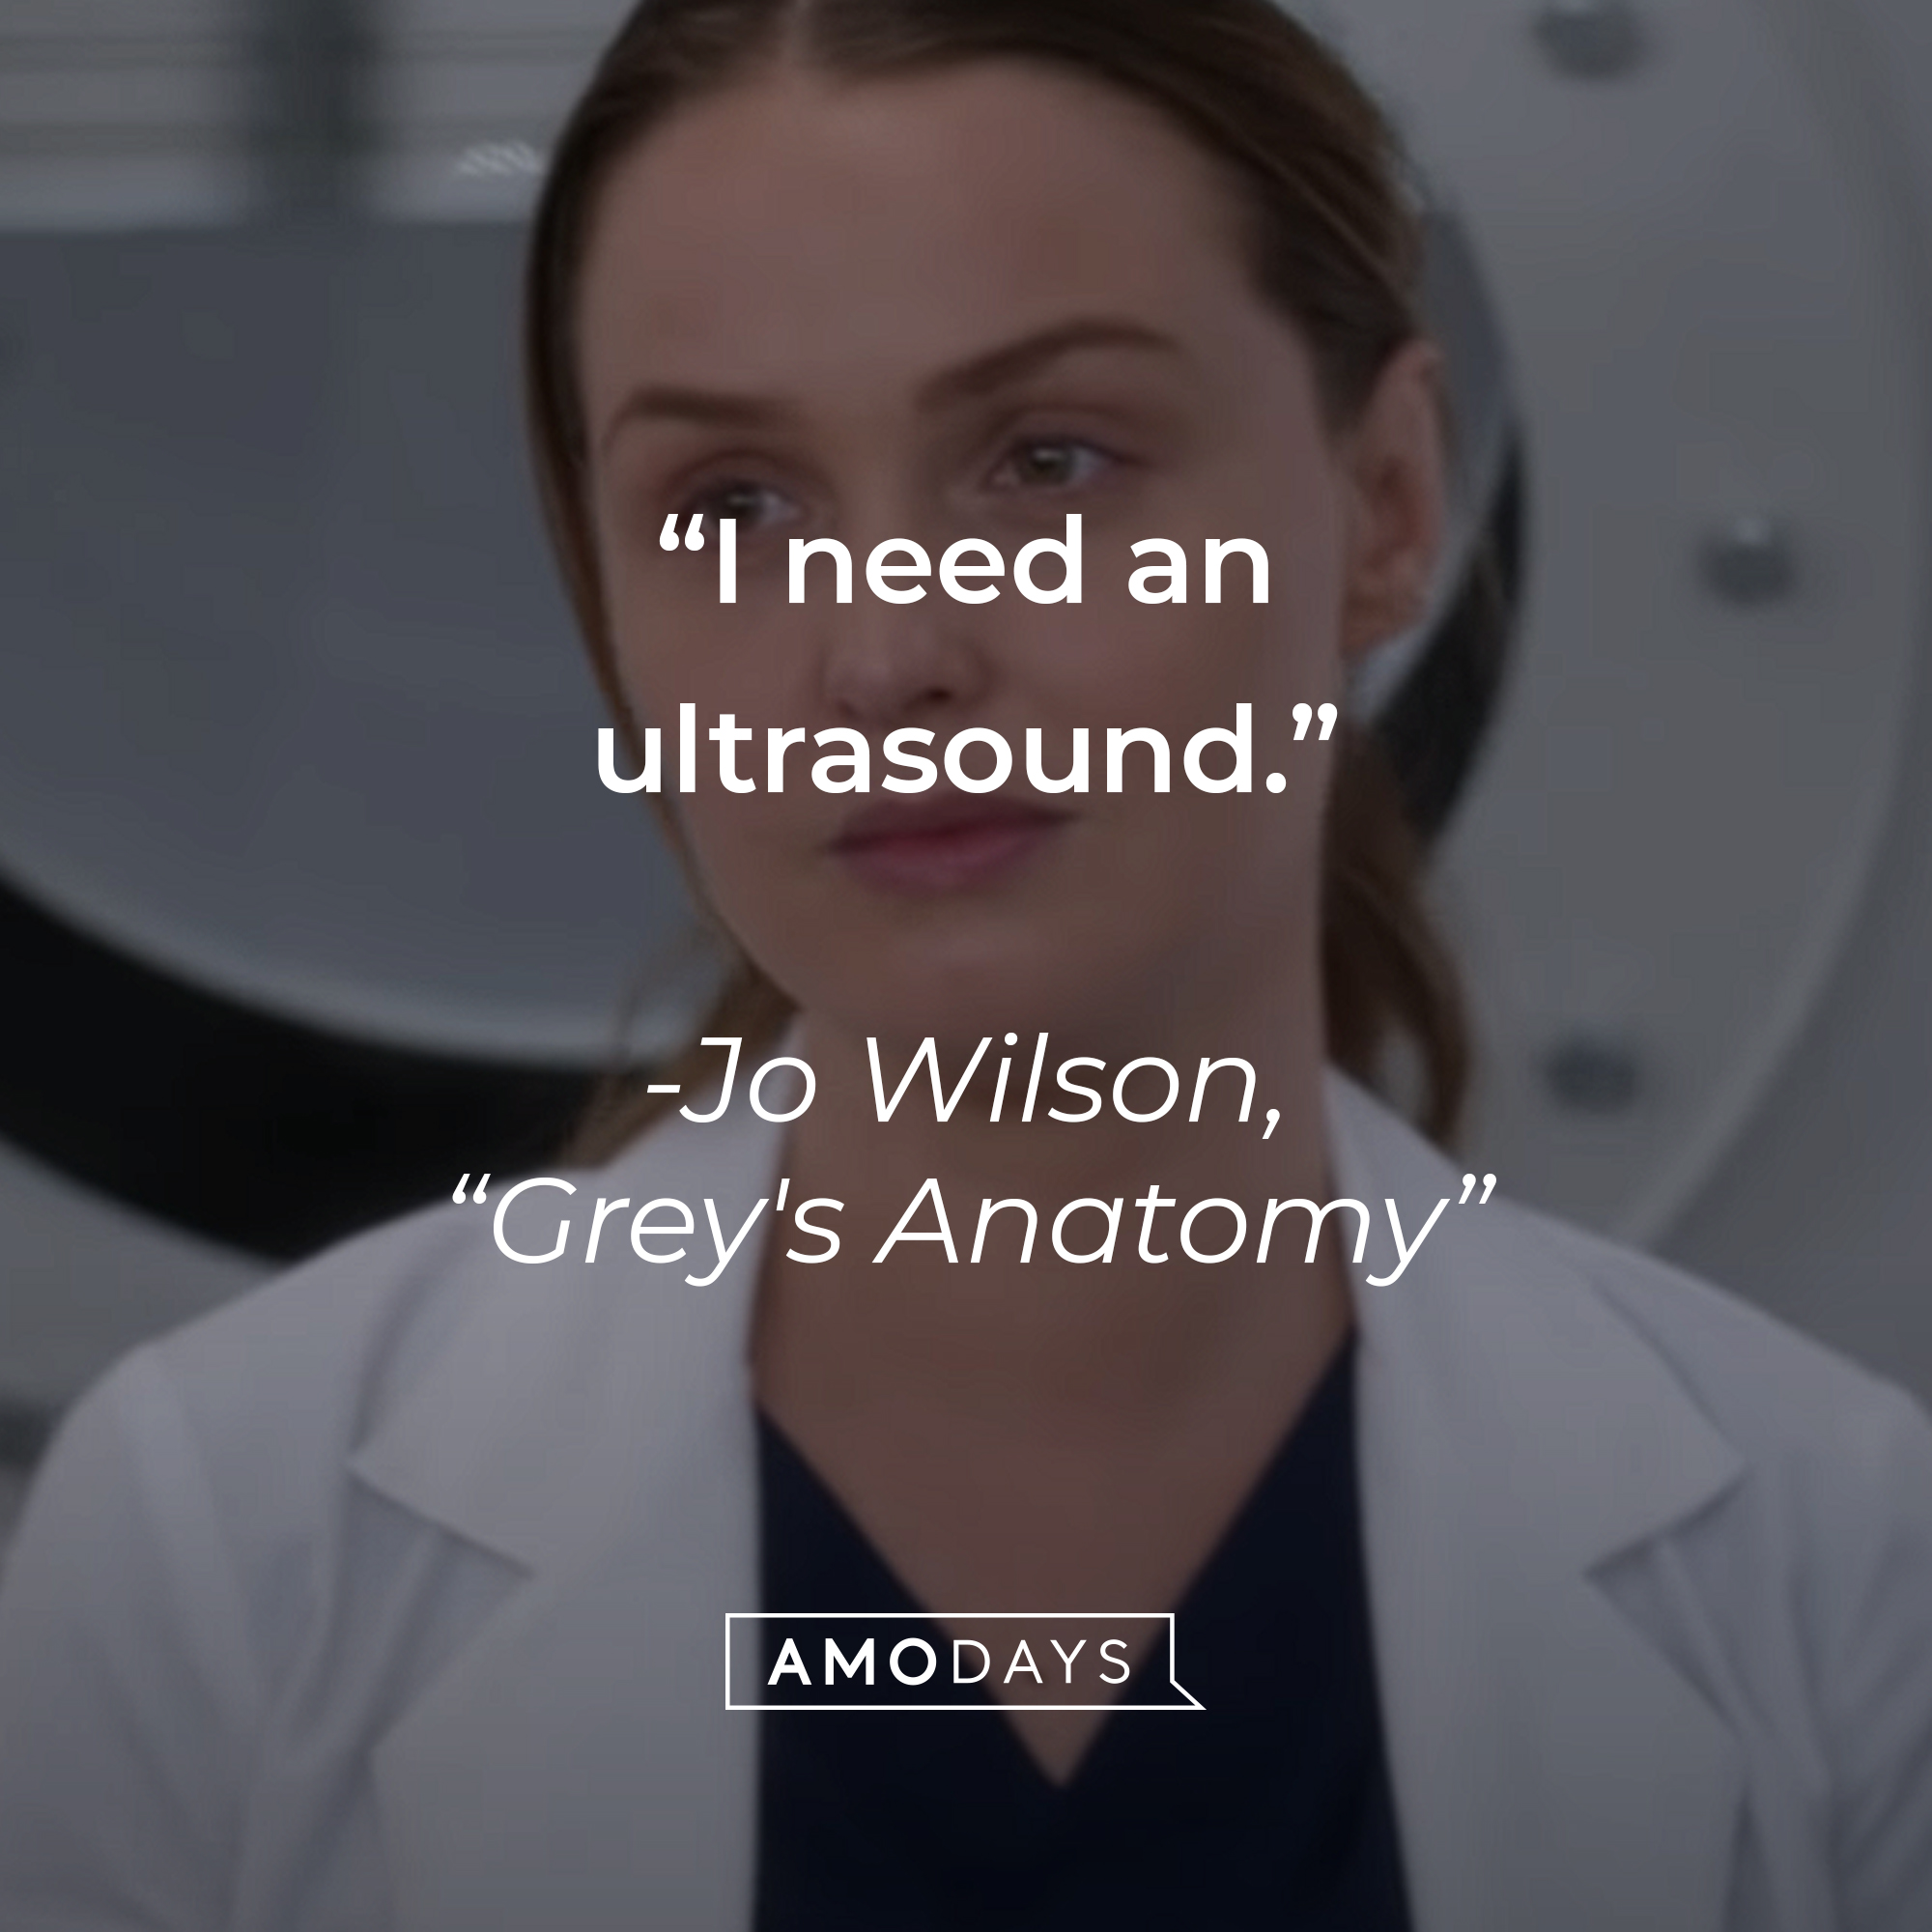 Jo Wilson’s quote from “Grey’s Anatomy”: “I need an ultrasound.” | Source: youtube.com/ABCNetwork